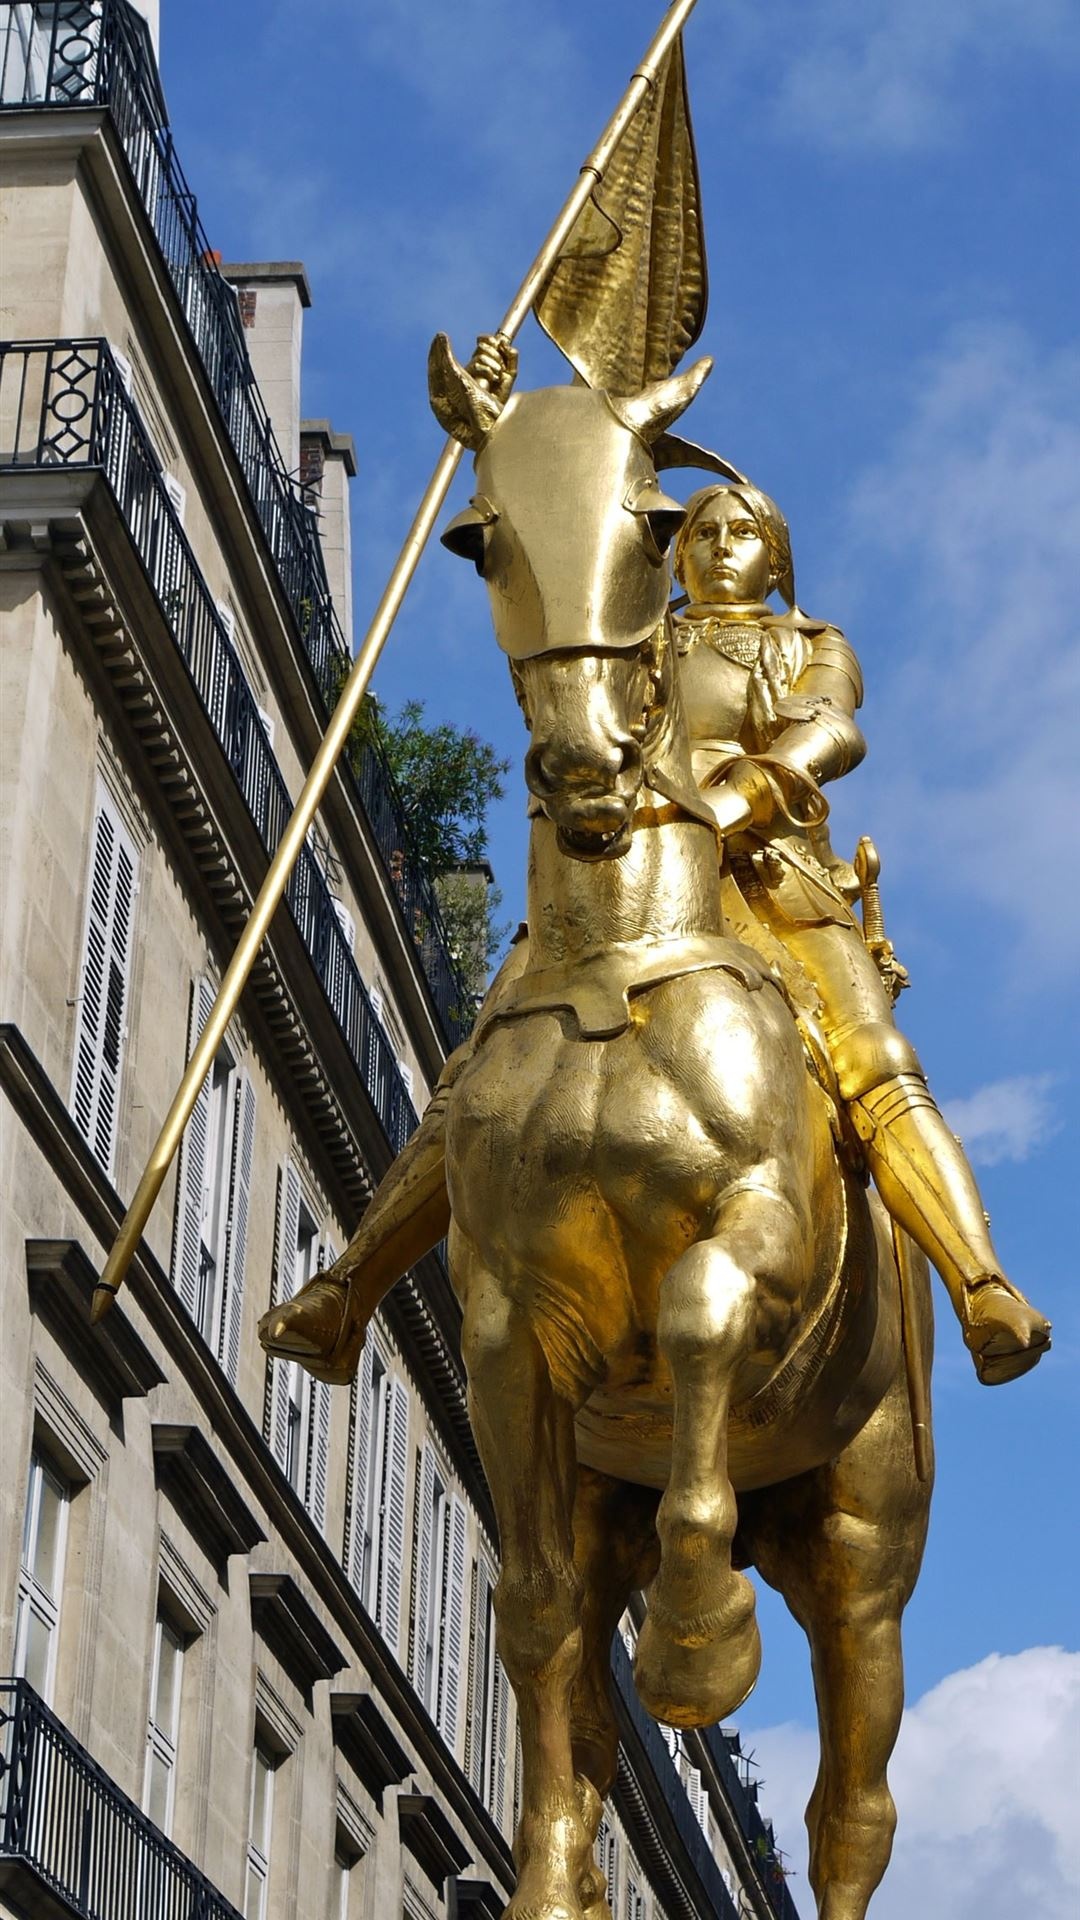 Joan of Arc, iPhone wallpapers, French heroine, Historical figure, 1080x1920 Full HD Handy